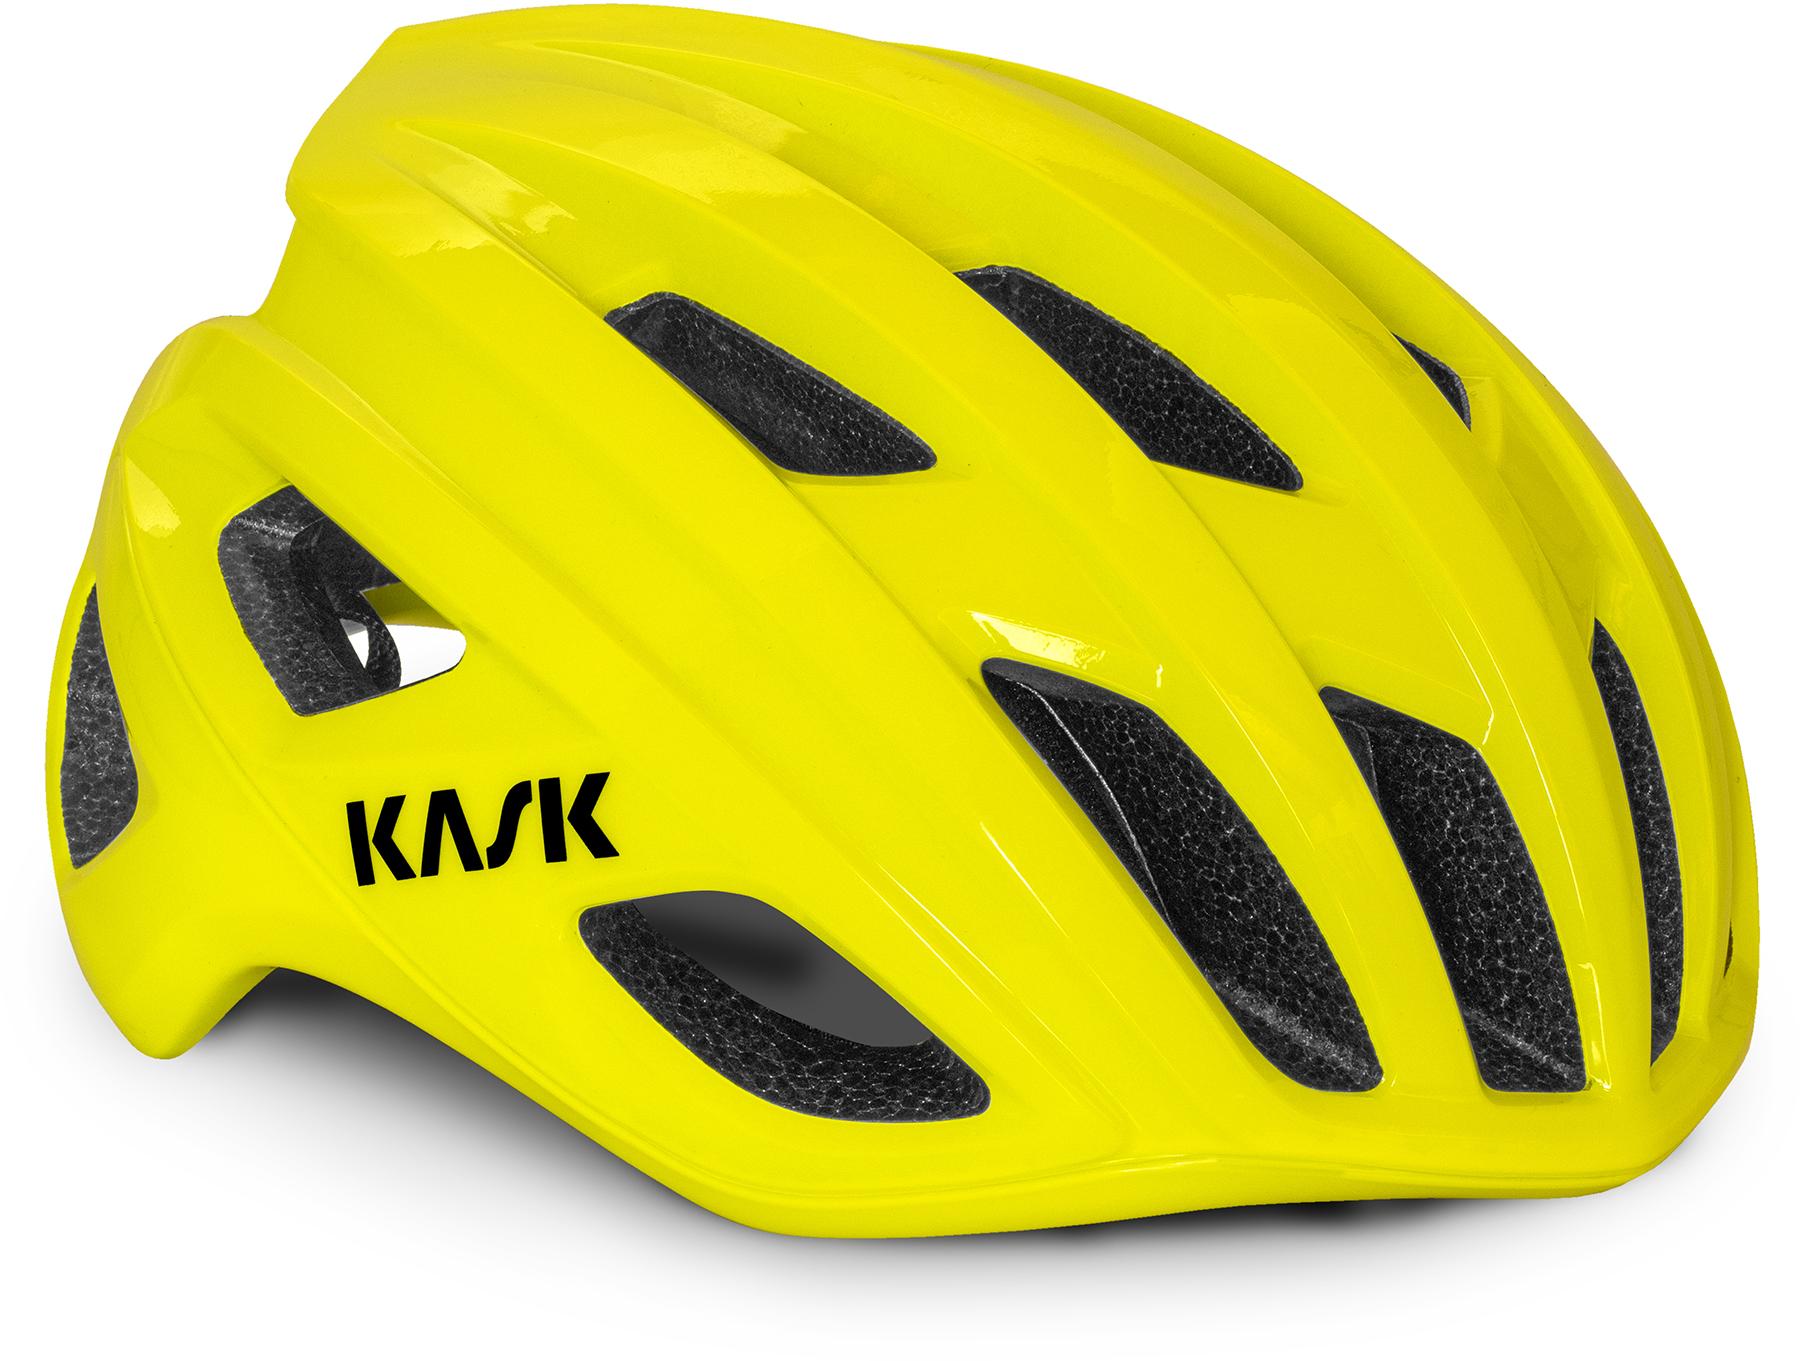 Kask Mojito3 Road Cycling Helmet (wg11) - Yellow Fluo